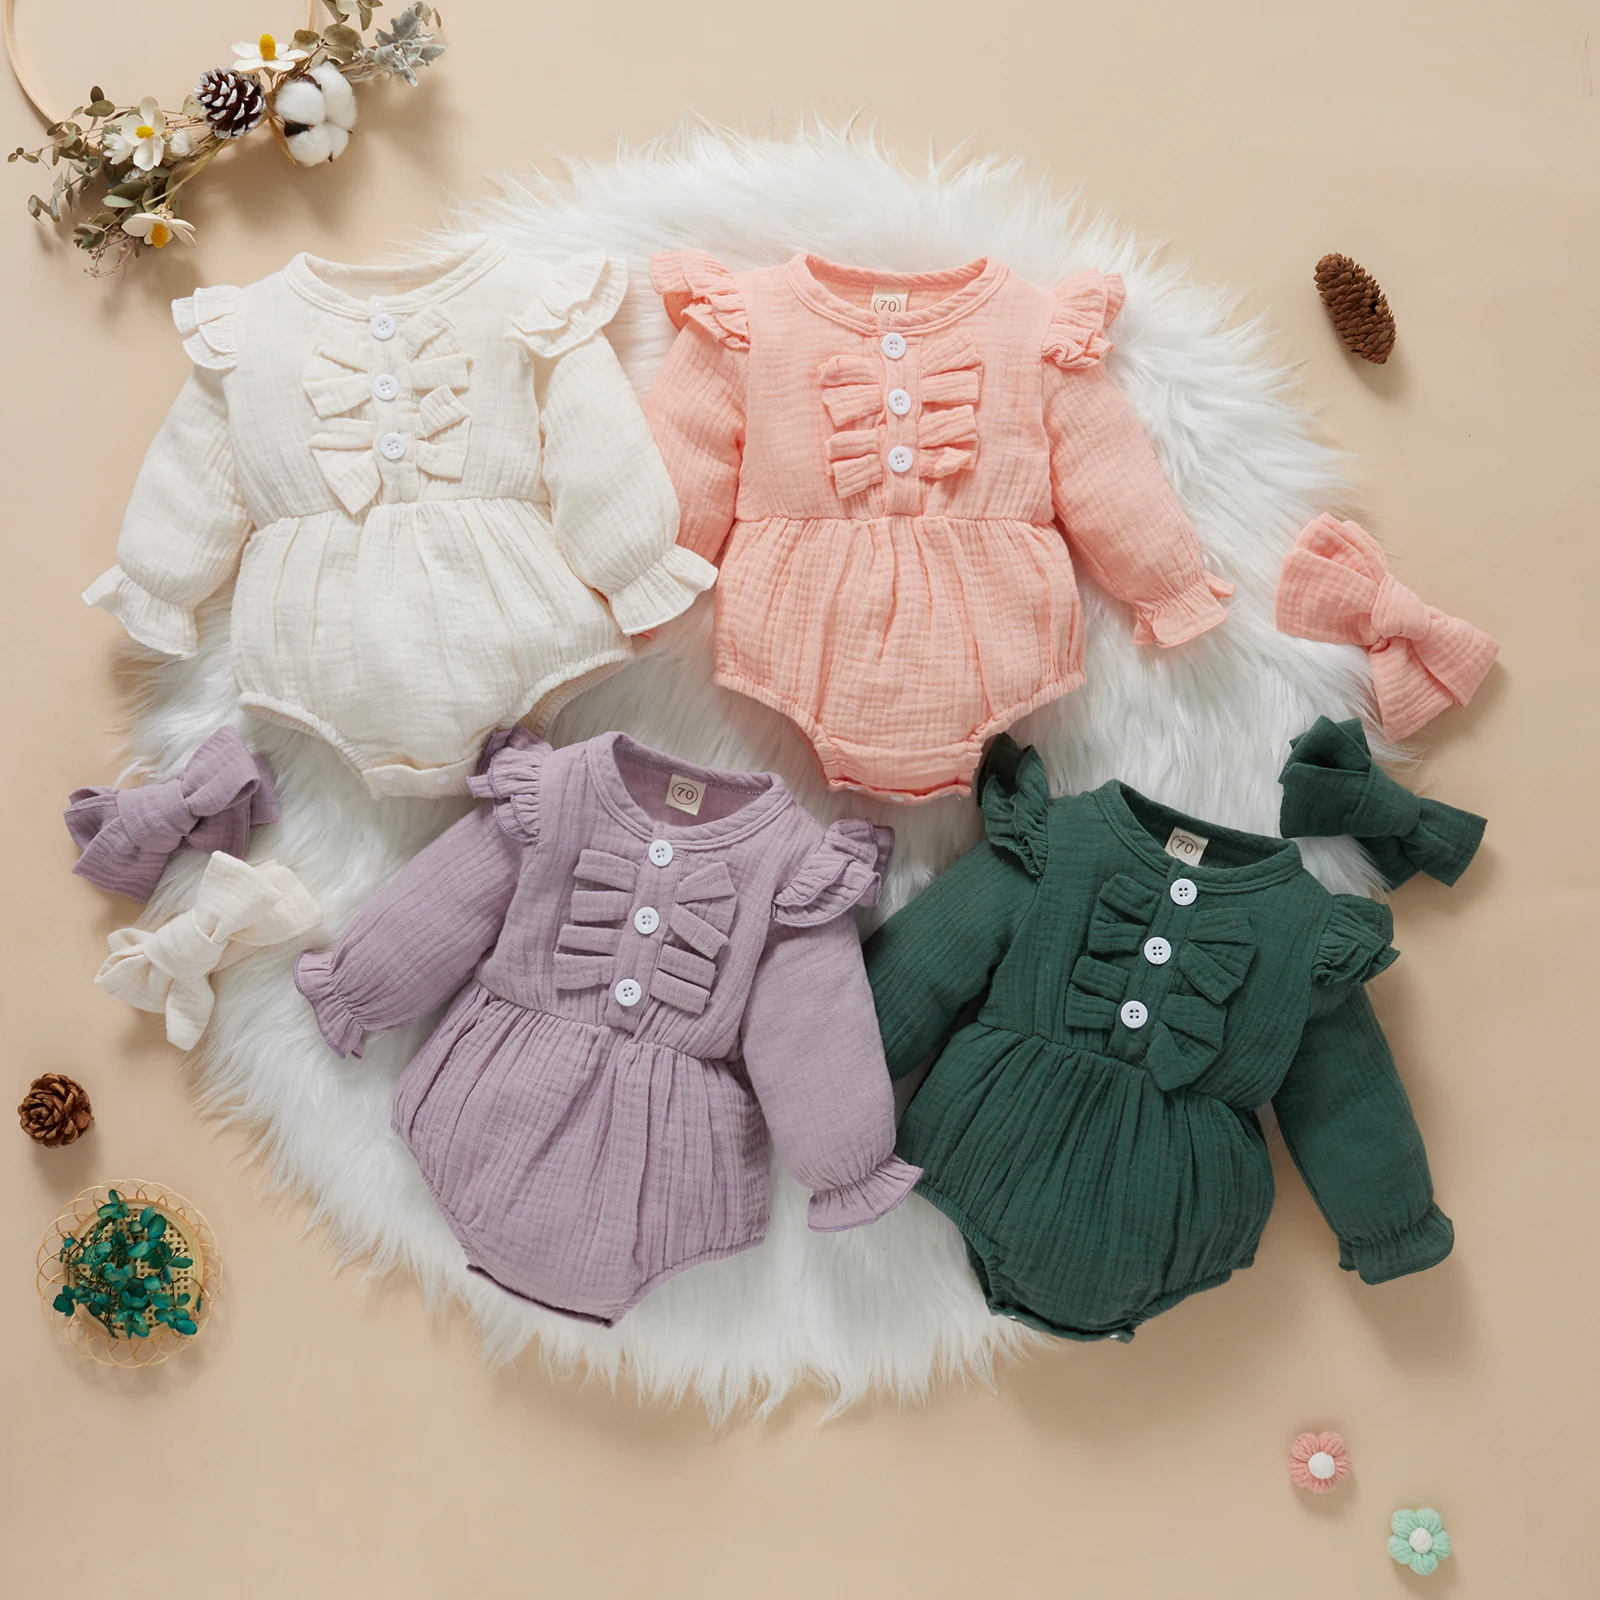 

SUNSIOM Newborn Baby Romper Infant Girls Cotton Linen Solid Color Round Collar Long Sleeve Rompers+Bow Knot Headdress 2pcs